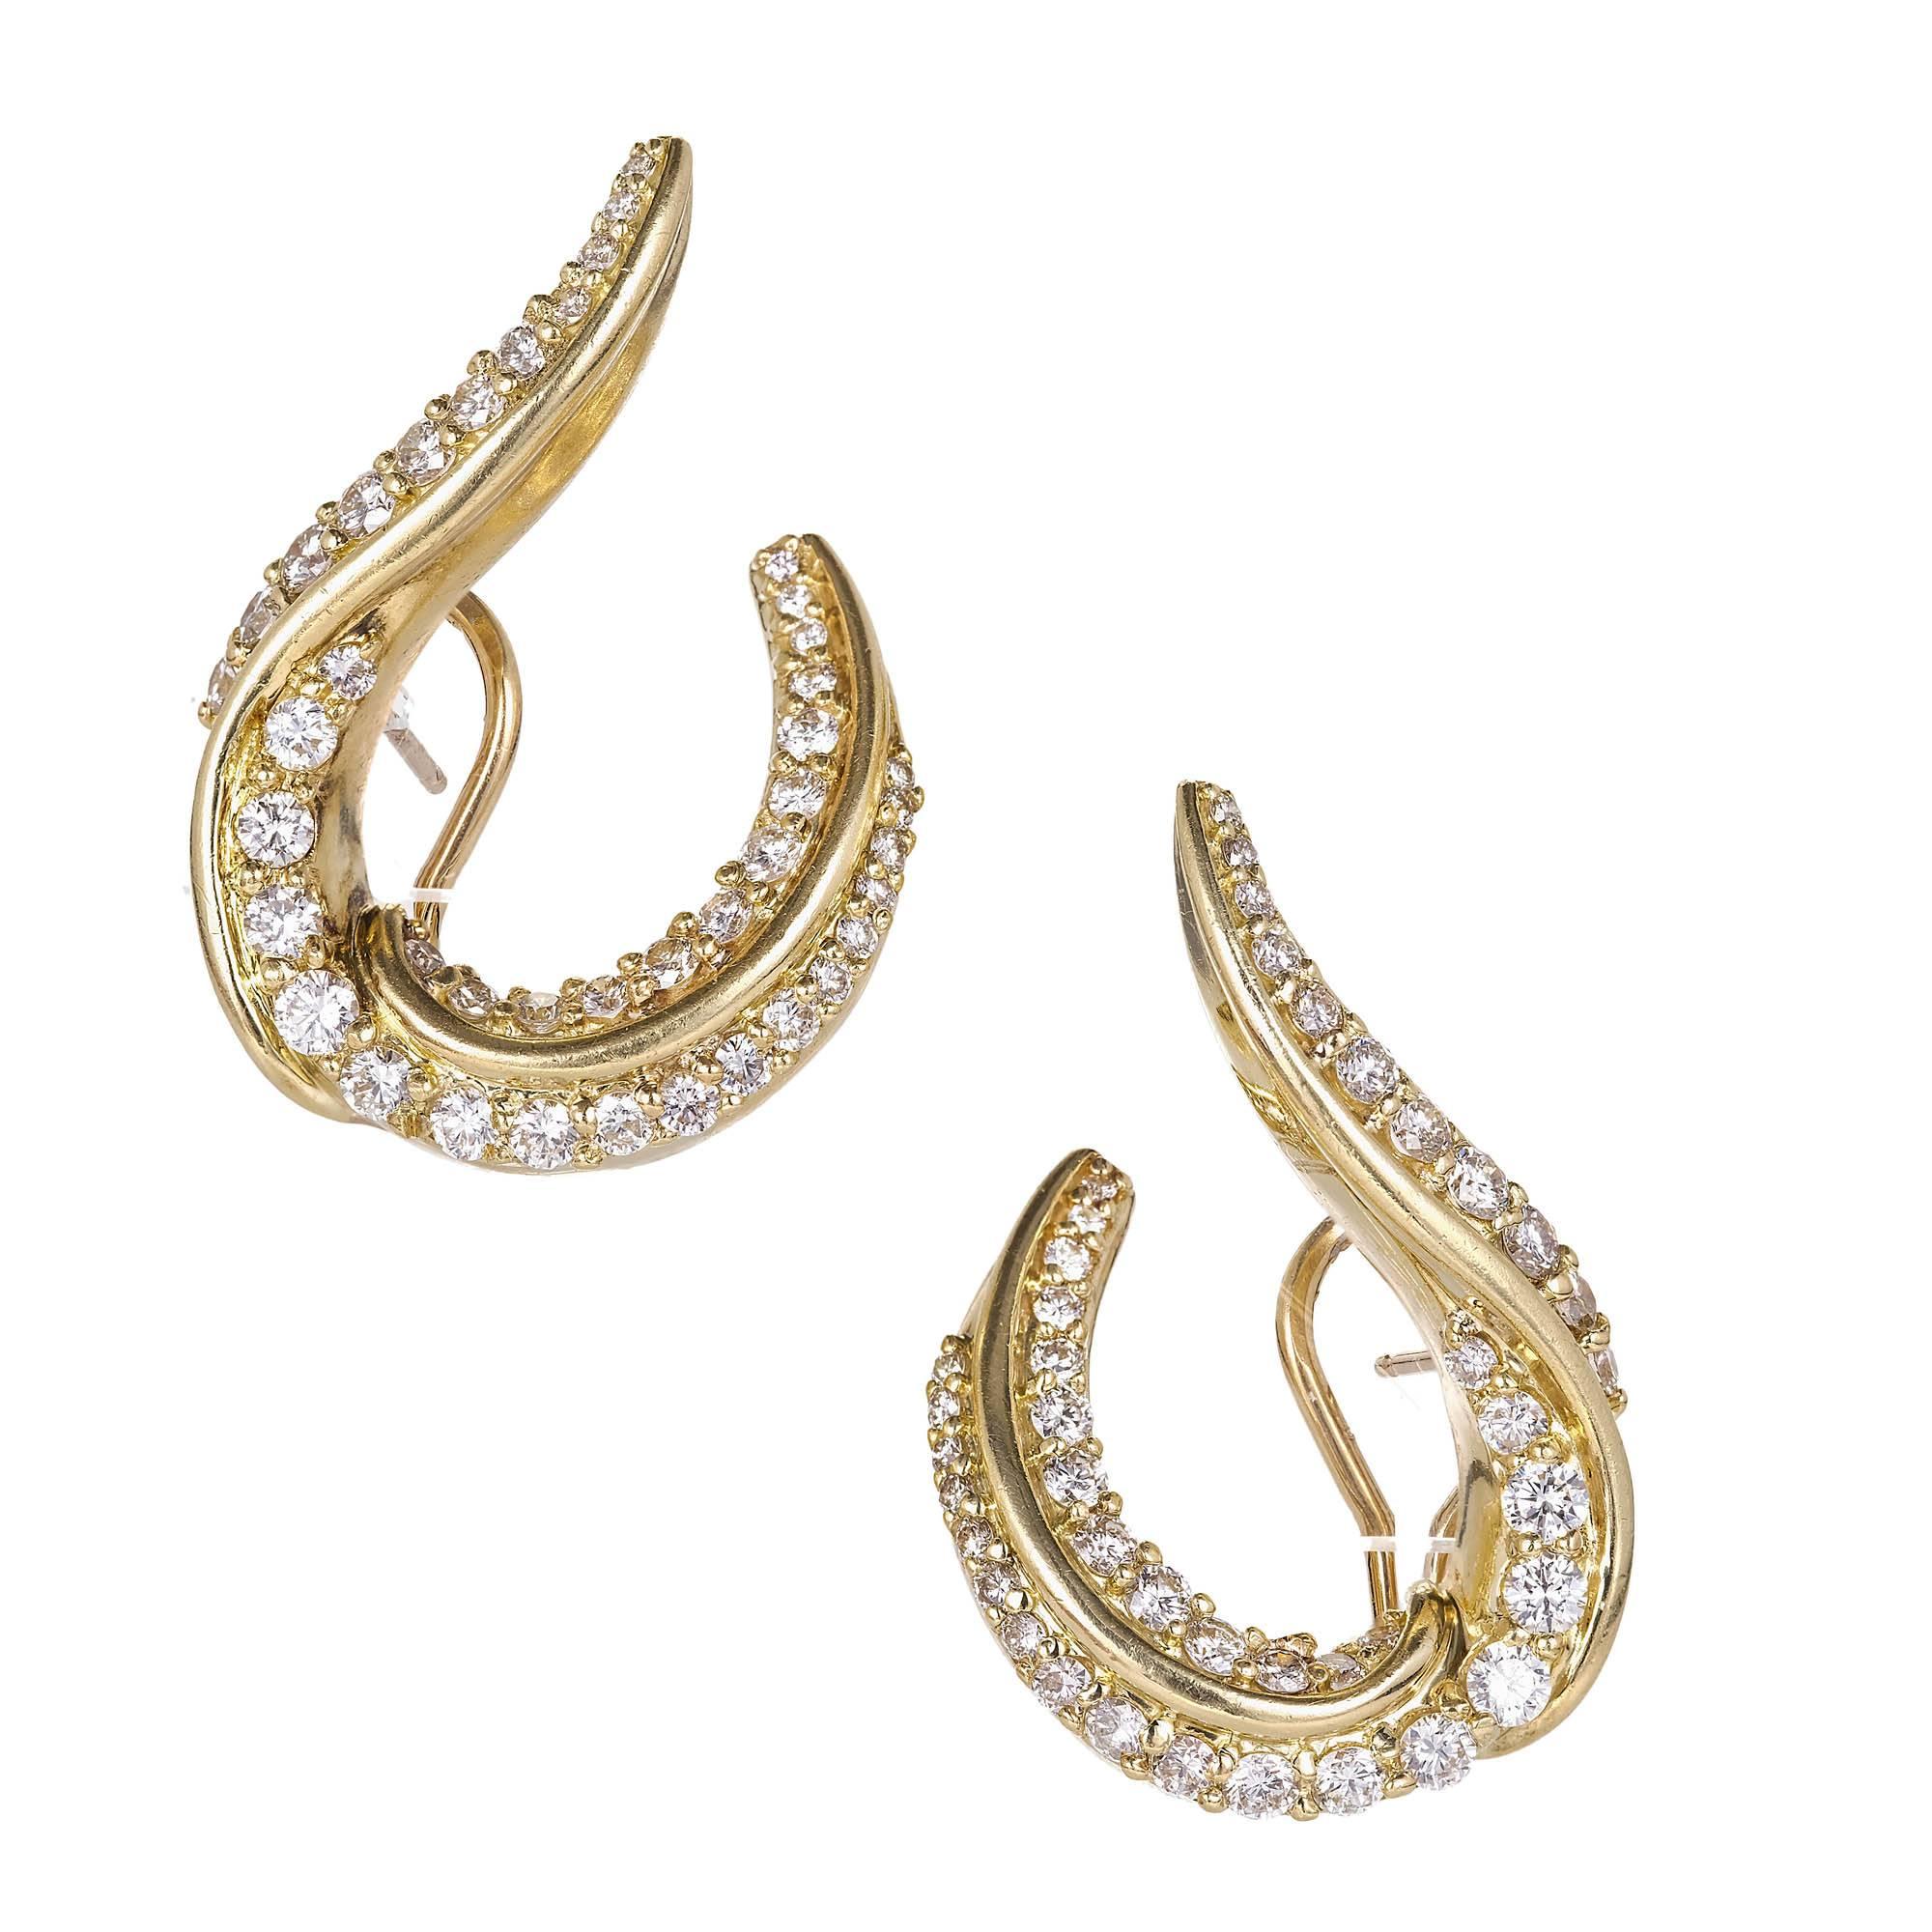 Original diamond 18k yellow gold stamped Rotenier Swirl clip post earrings, stamped with a registration number. Set with E-F VS round cut diamonds.

78 round diamonds approx. total weight 2.50cts, F, VS.
Stamped 18k 200219GA. Routier.
21.3 grams.
1